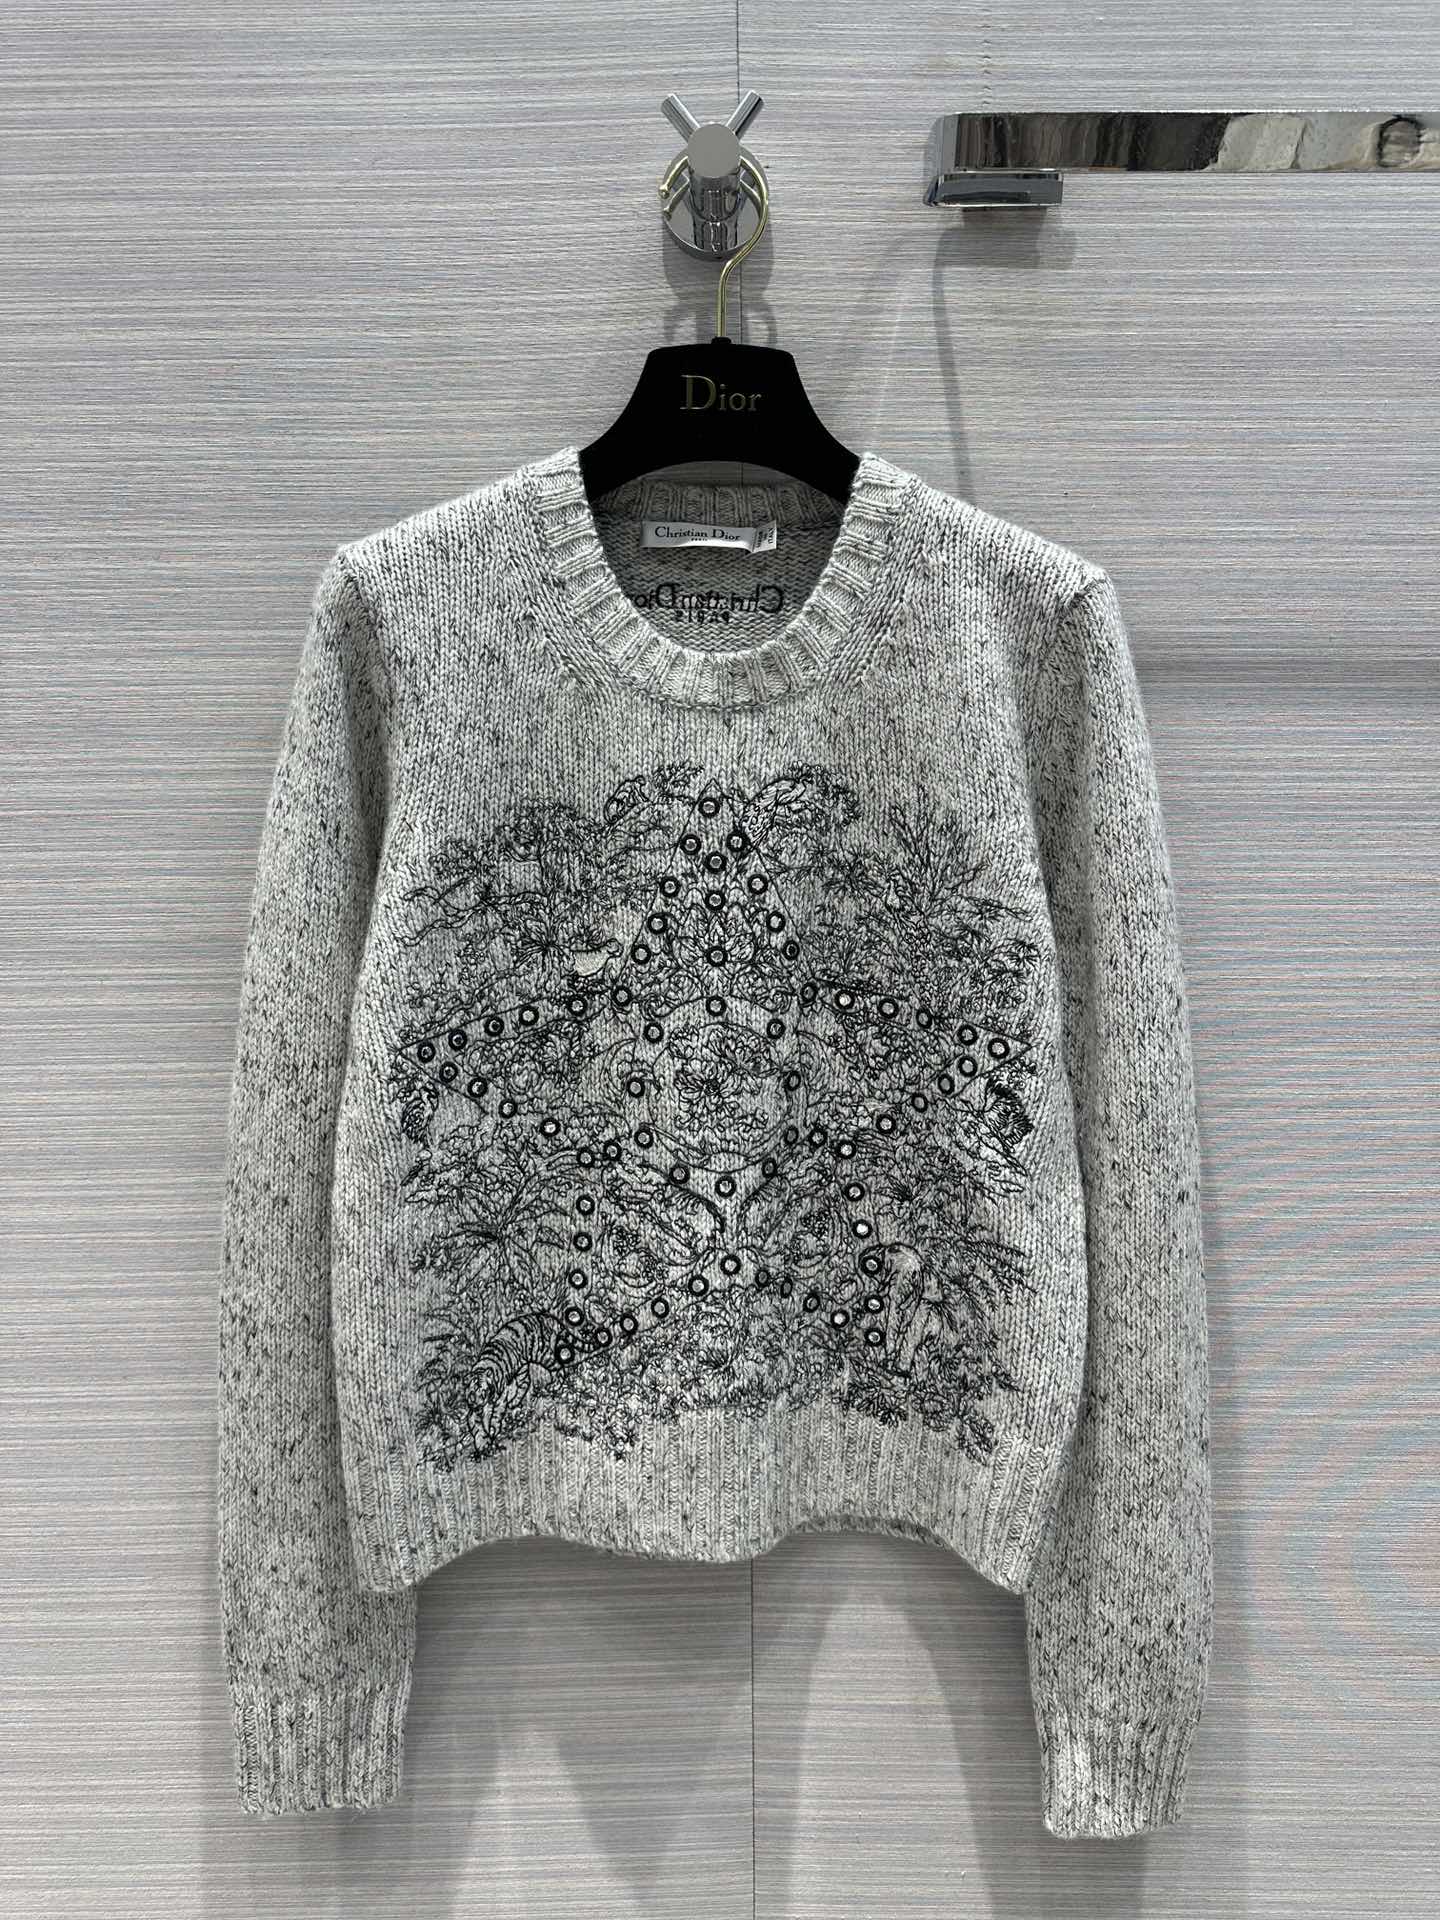 Dior Clothing Sweatshirts White Embroidery Cashmere Fall Collection